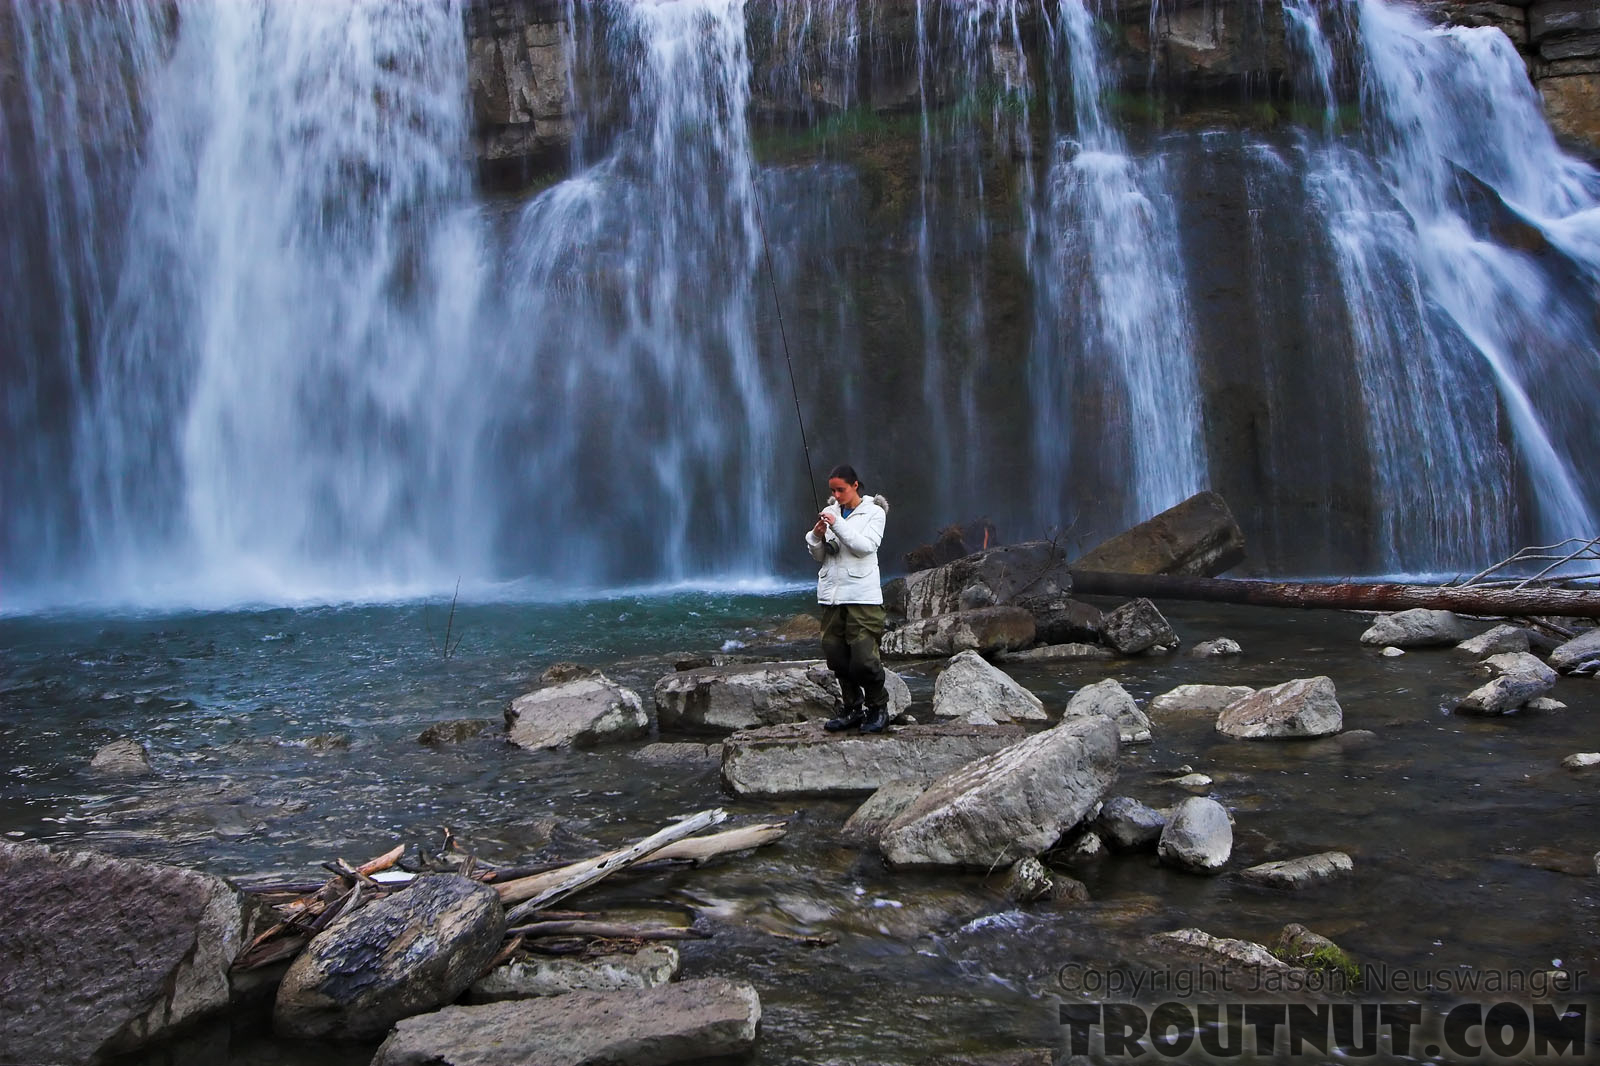 My girlfriend prepares to cast into a deep waterfall pool. From Salmon Creek, Ludlowville Falls in New York.